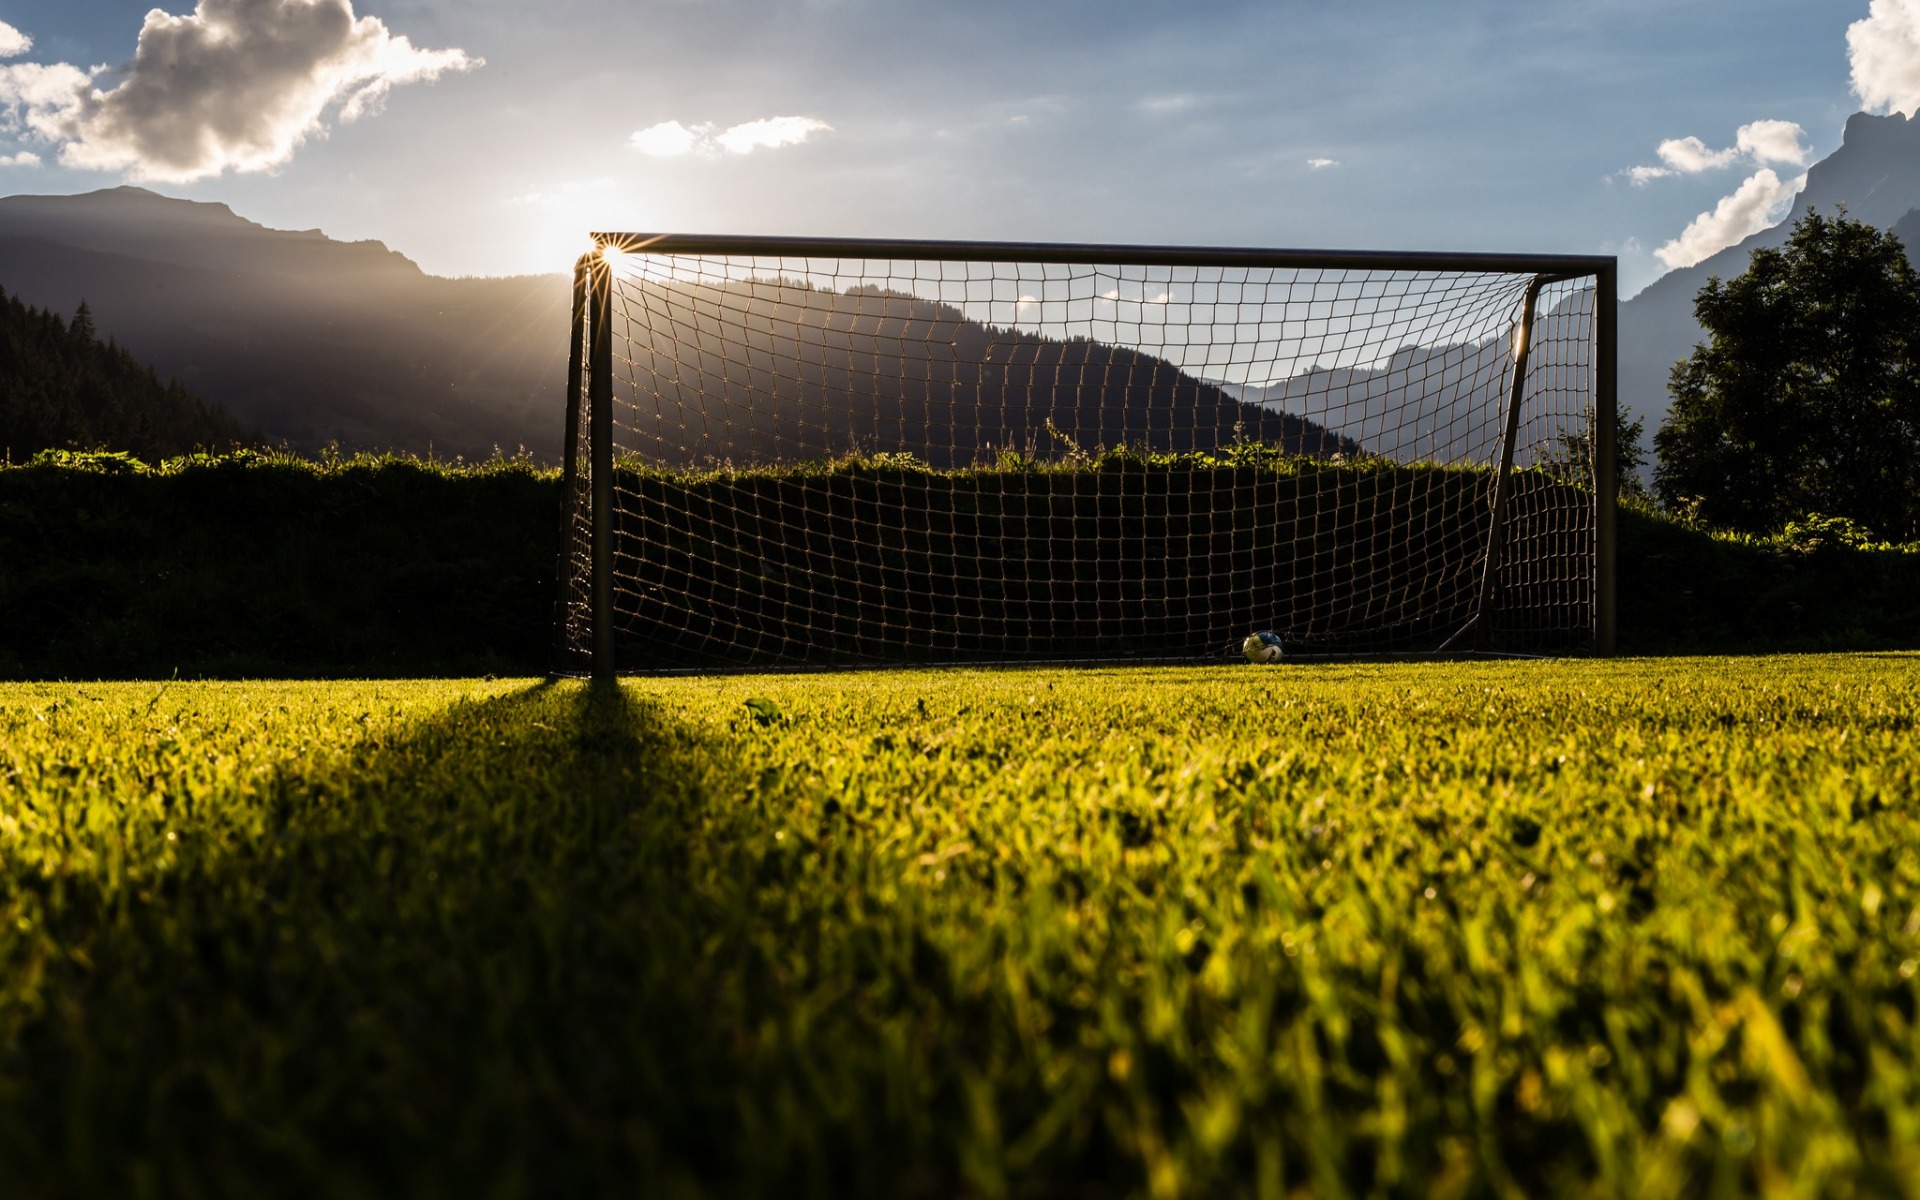 Download wallpaper football goal, training football field, sunset, football concepts for desktop with resolution 1920x1200. High Quality HD picture wallpaper